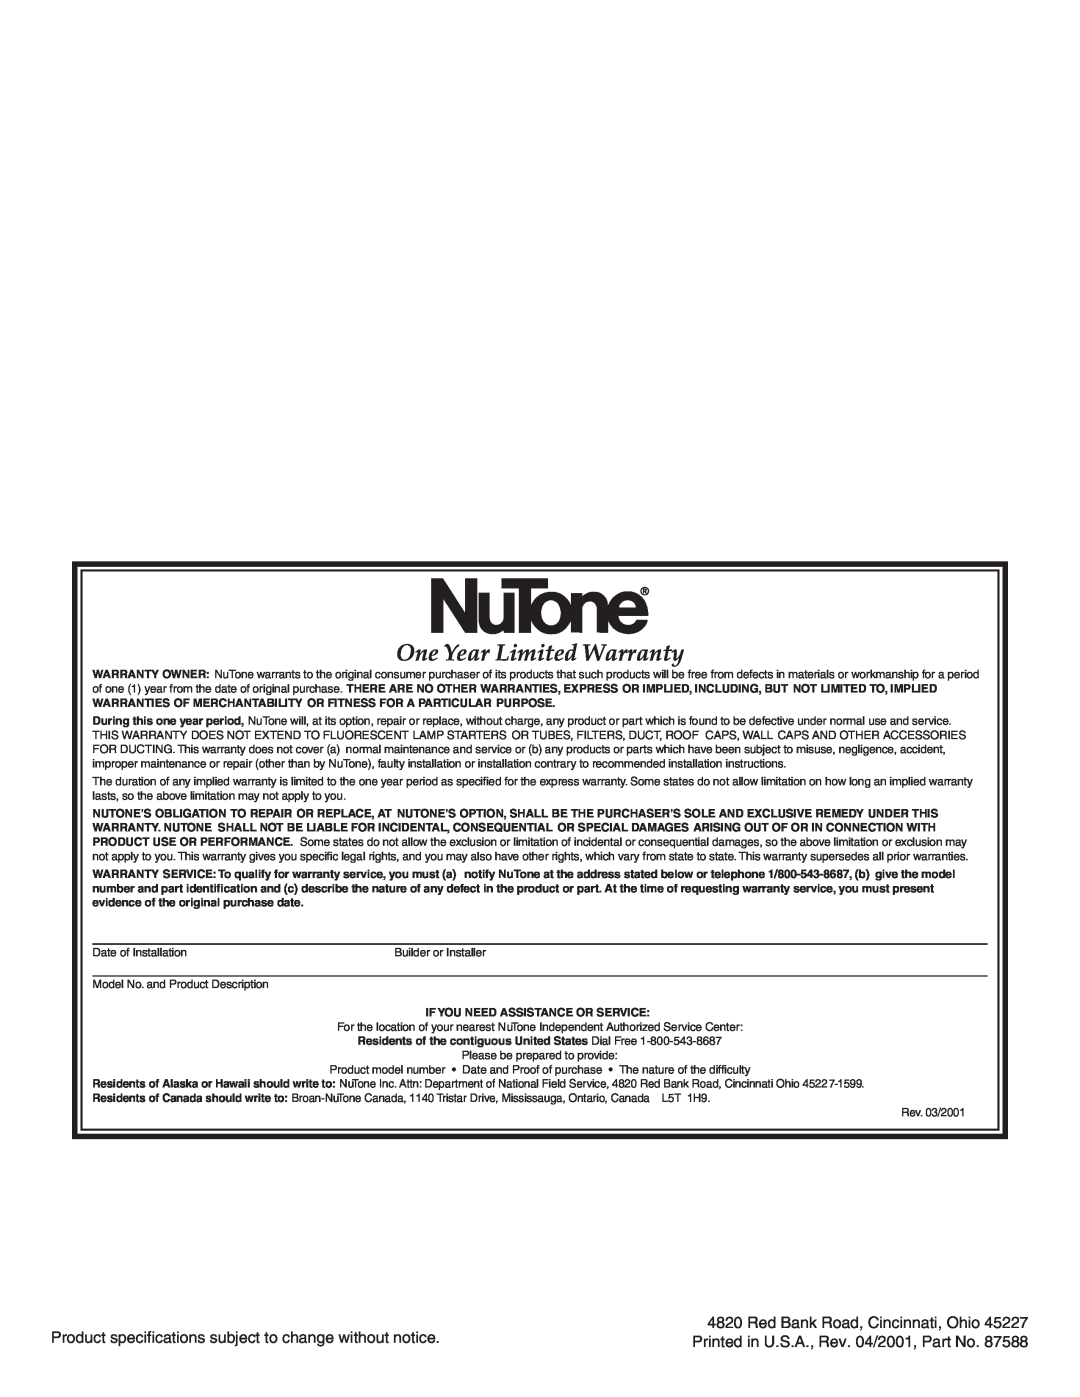 NuTone 8663RF One Year Limited Warranty, Product specifications subject to change without notice 